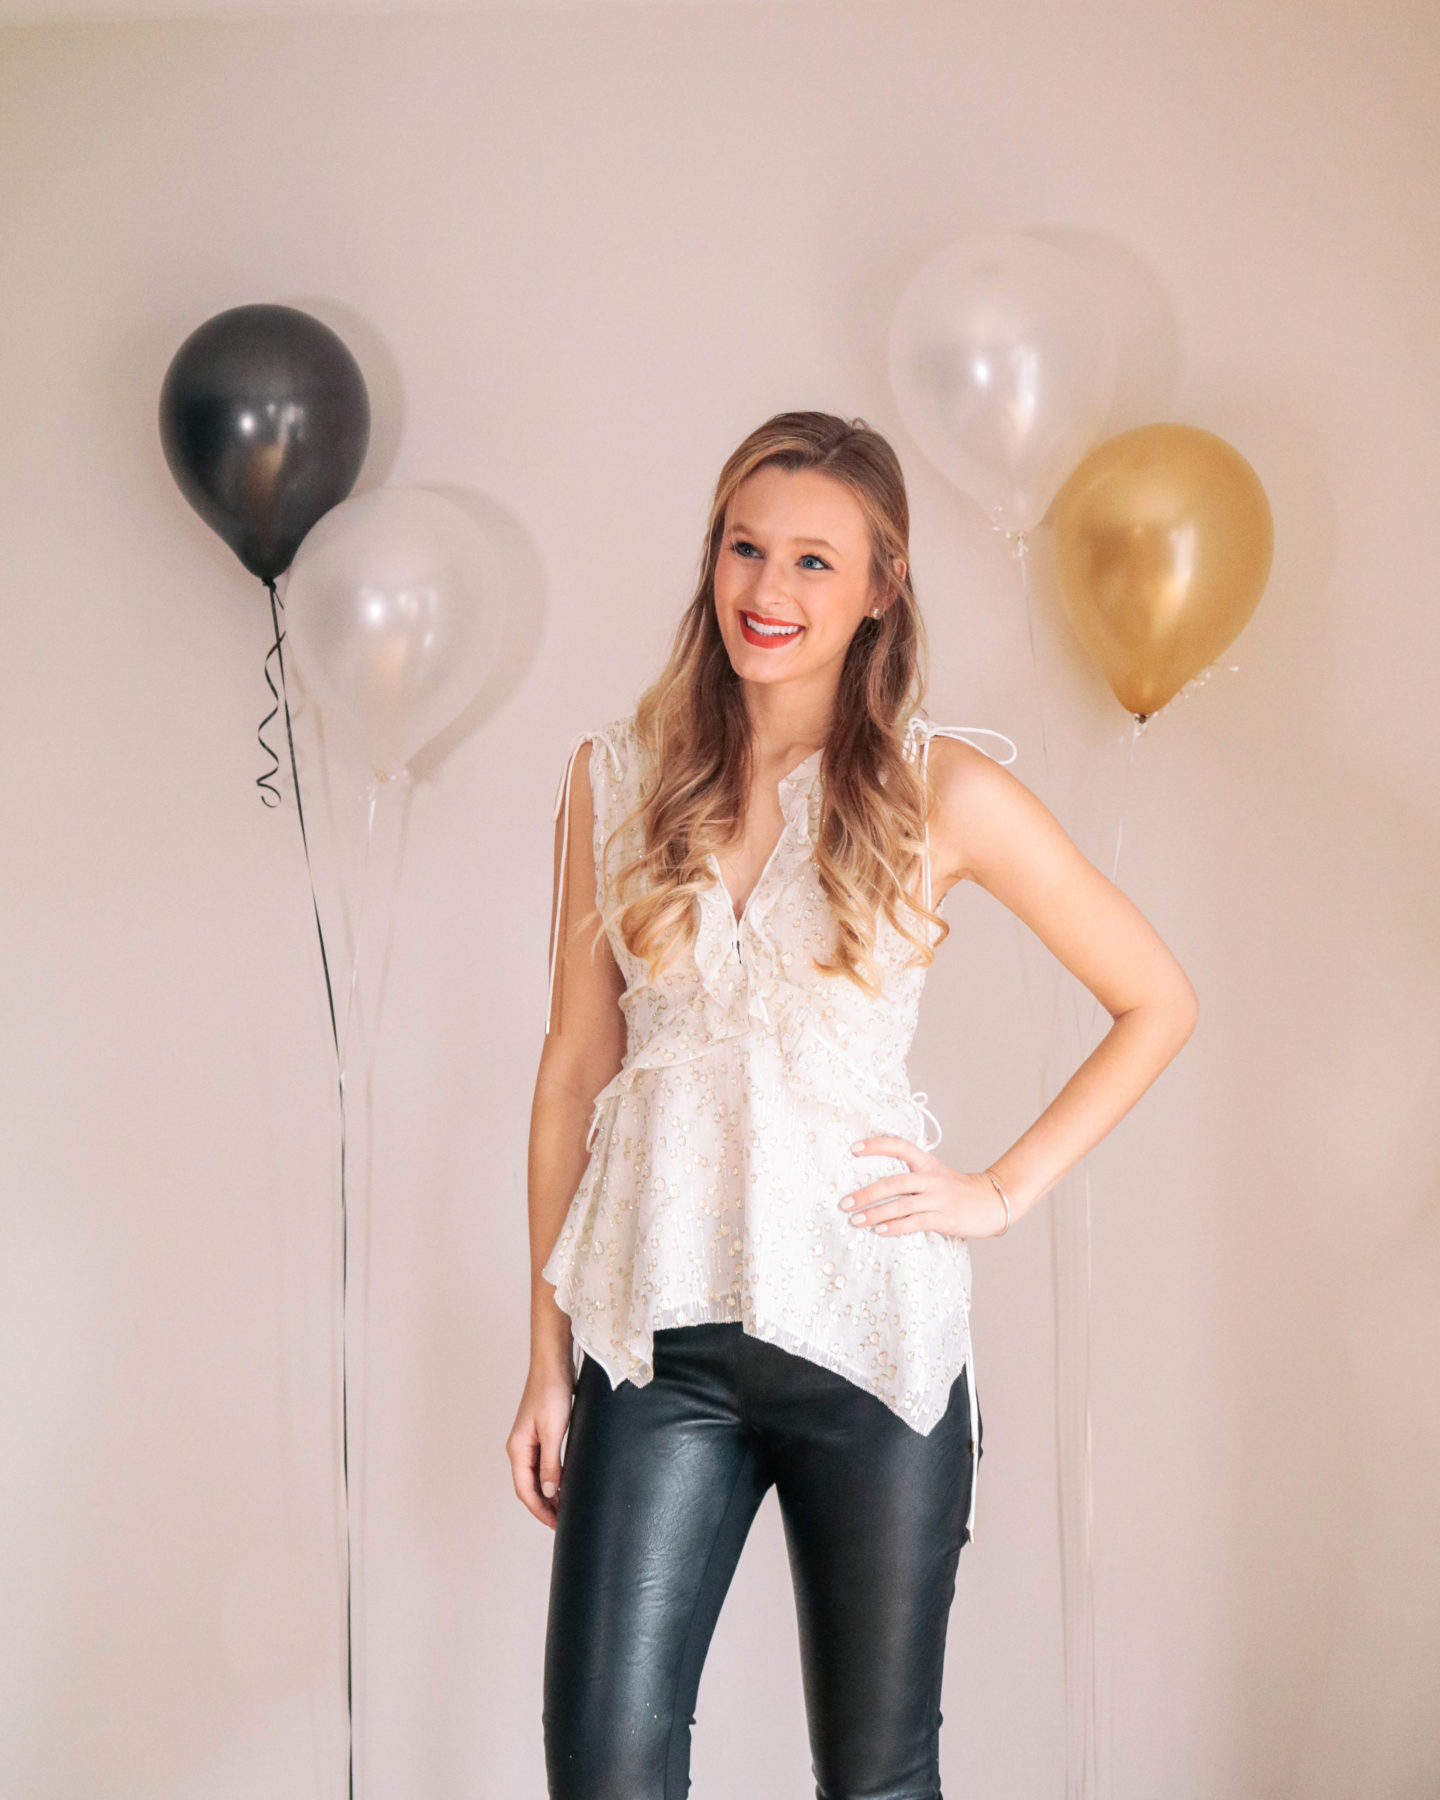 Fashion blogger, Leigha Gardner, of The Lilac Press sharing some designer looks for NYE including this silk Derek Lam top and Stella McCartney faux leather leggings.